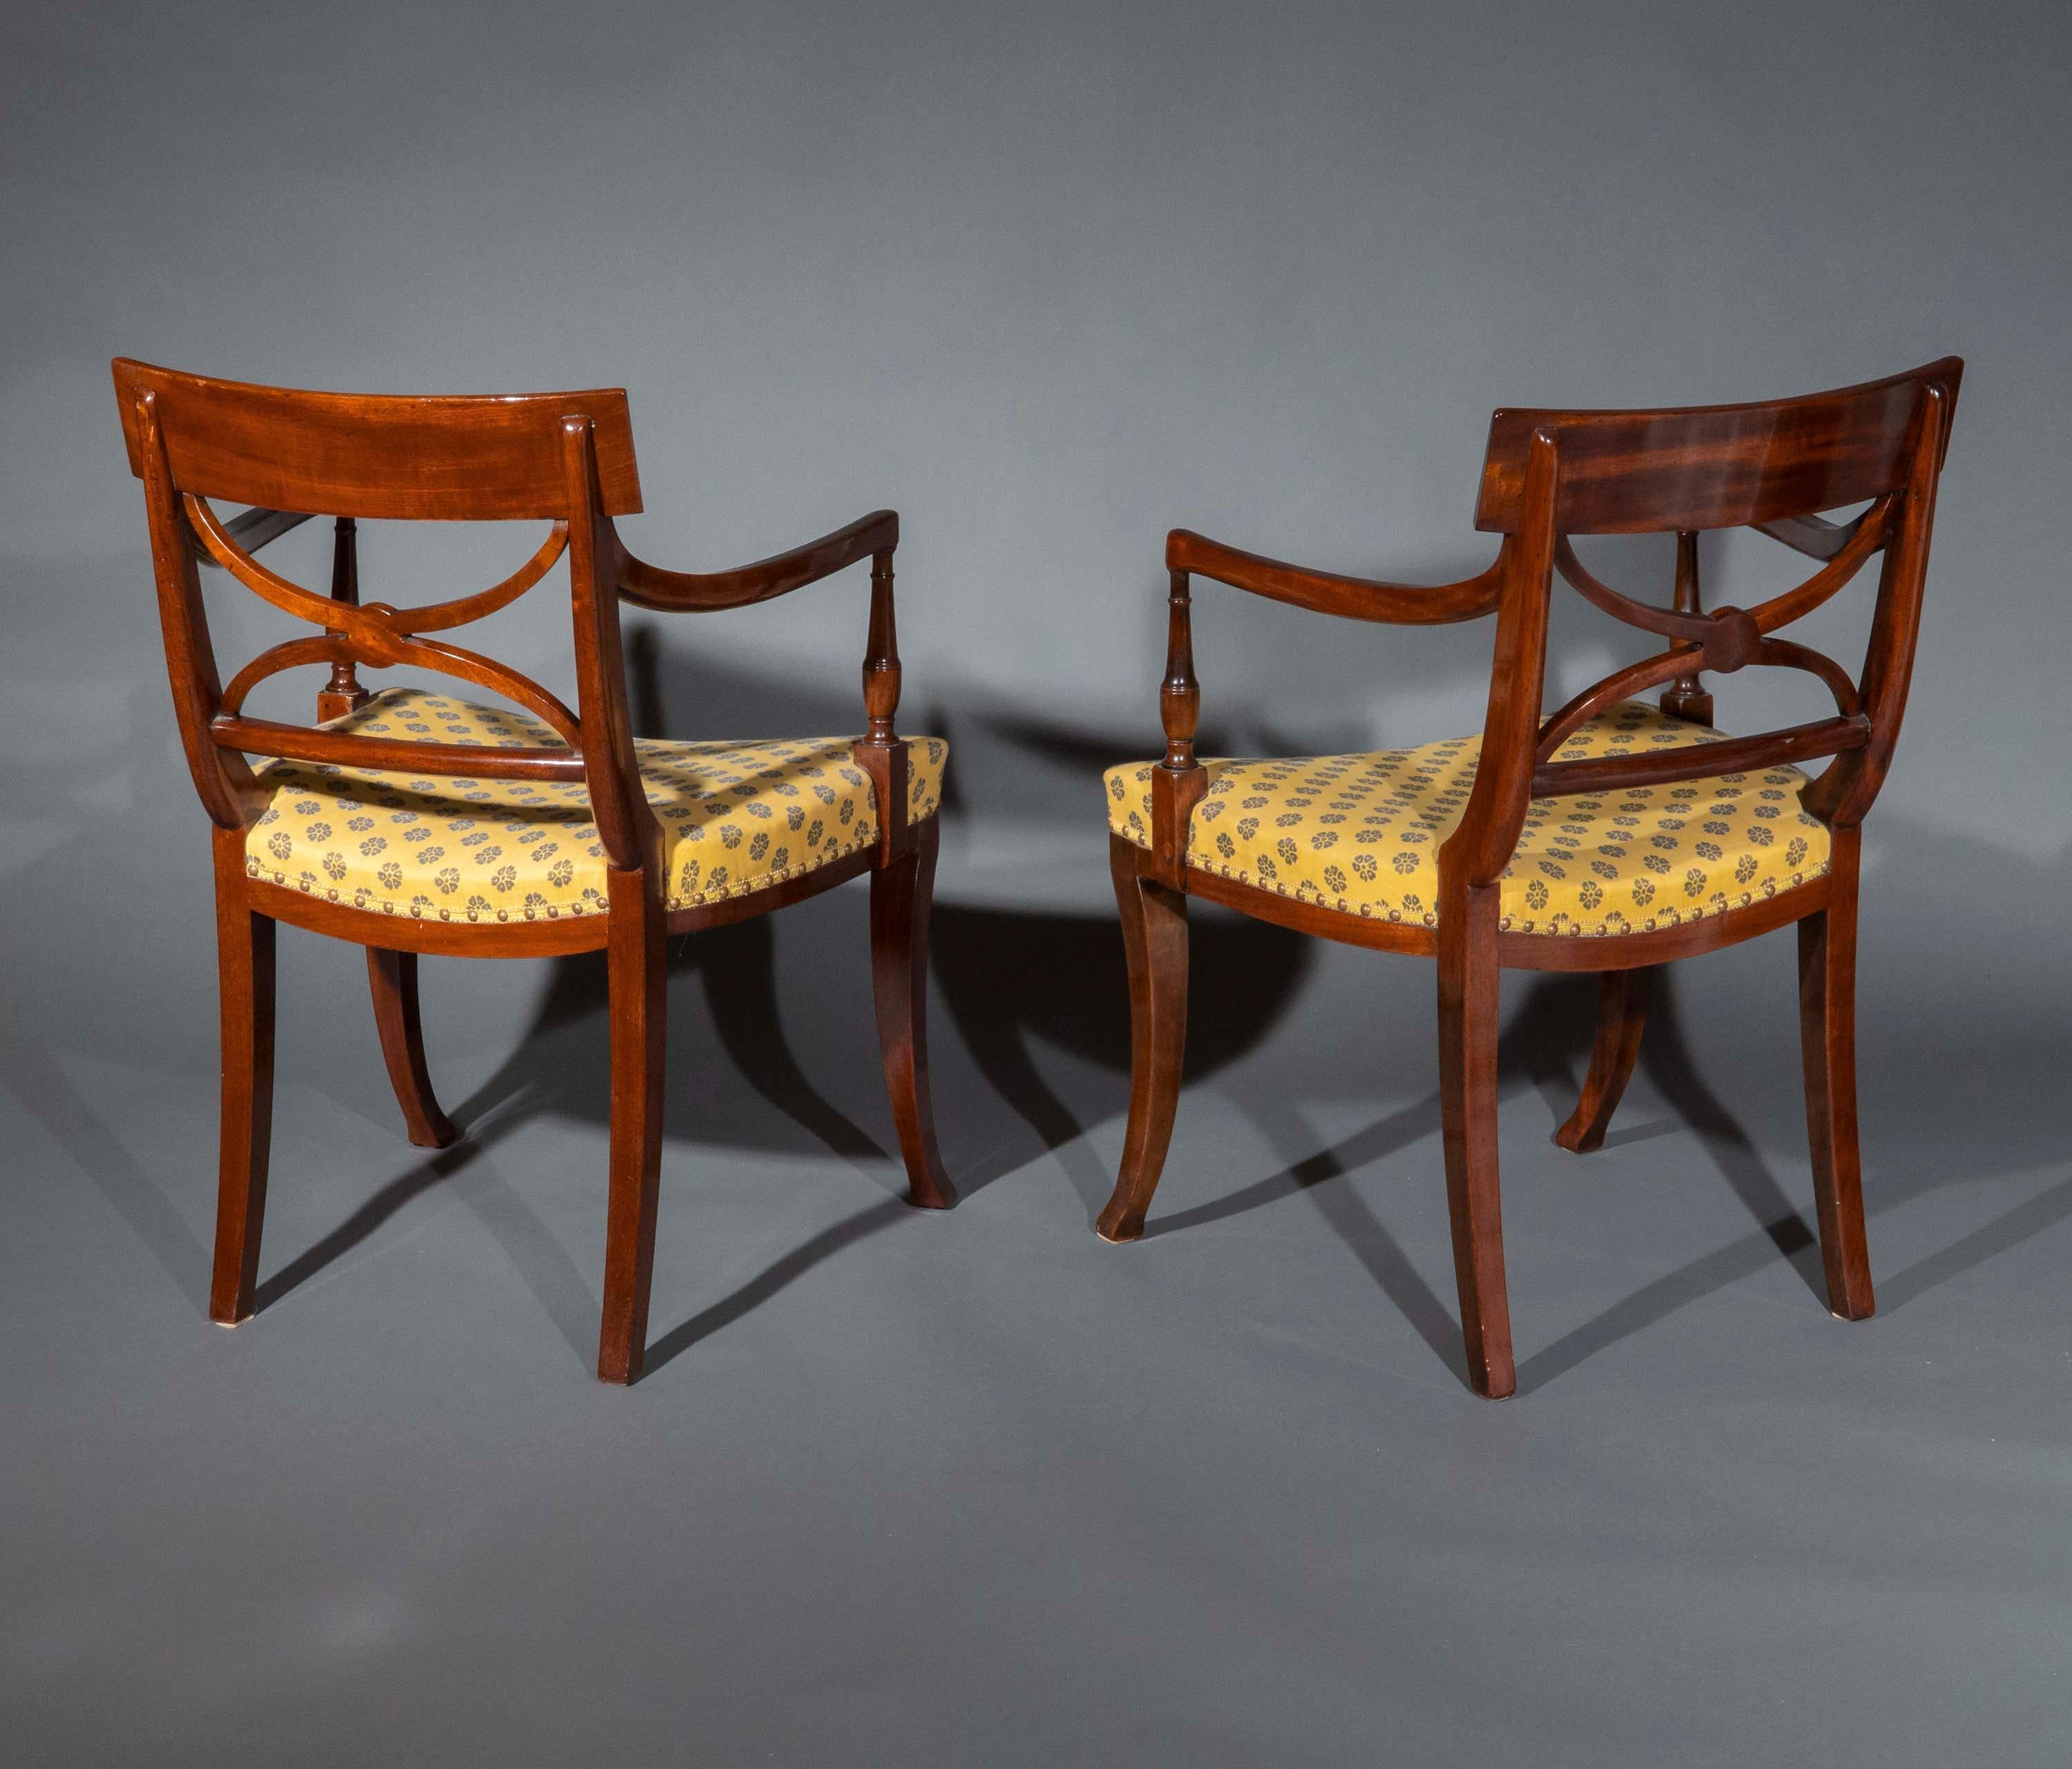 Pair of Regency Klismos Chairs, attributed to Gillows, early 19th century 1